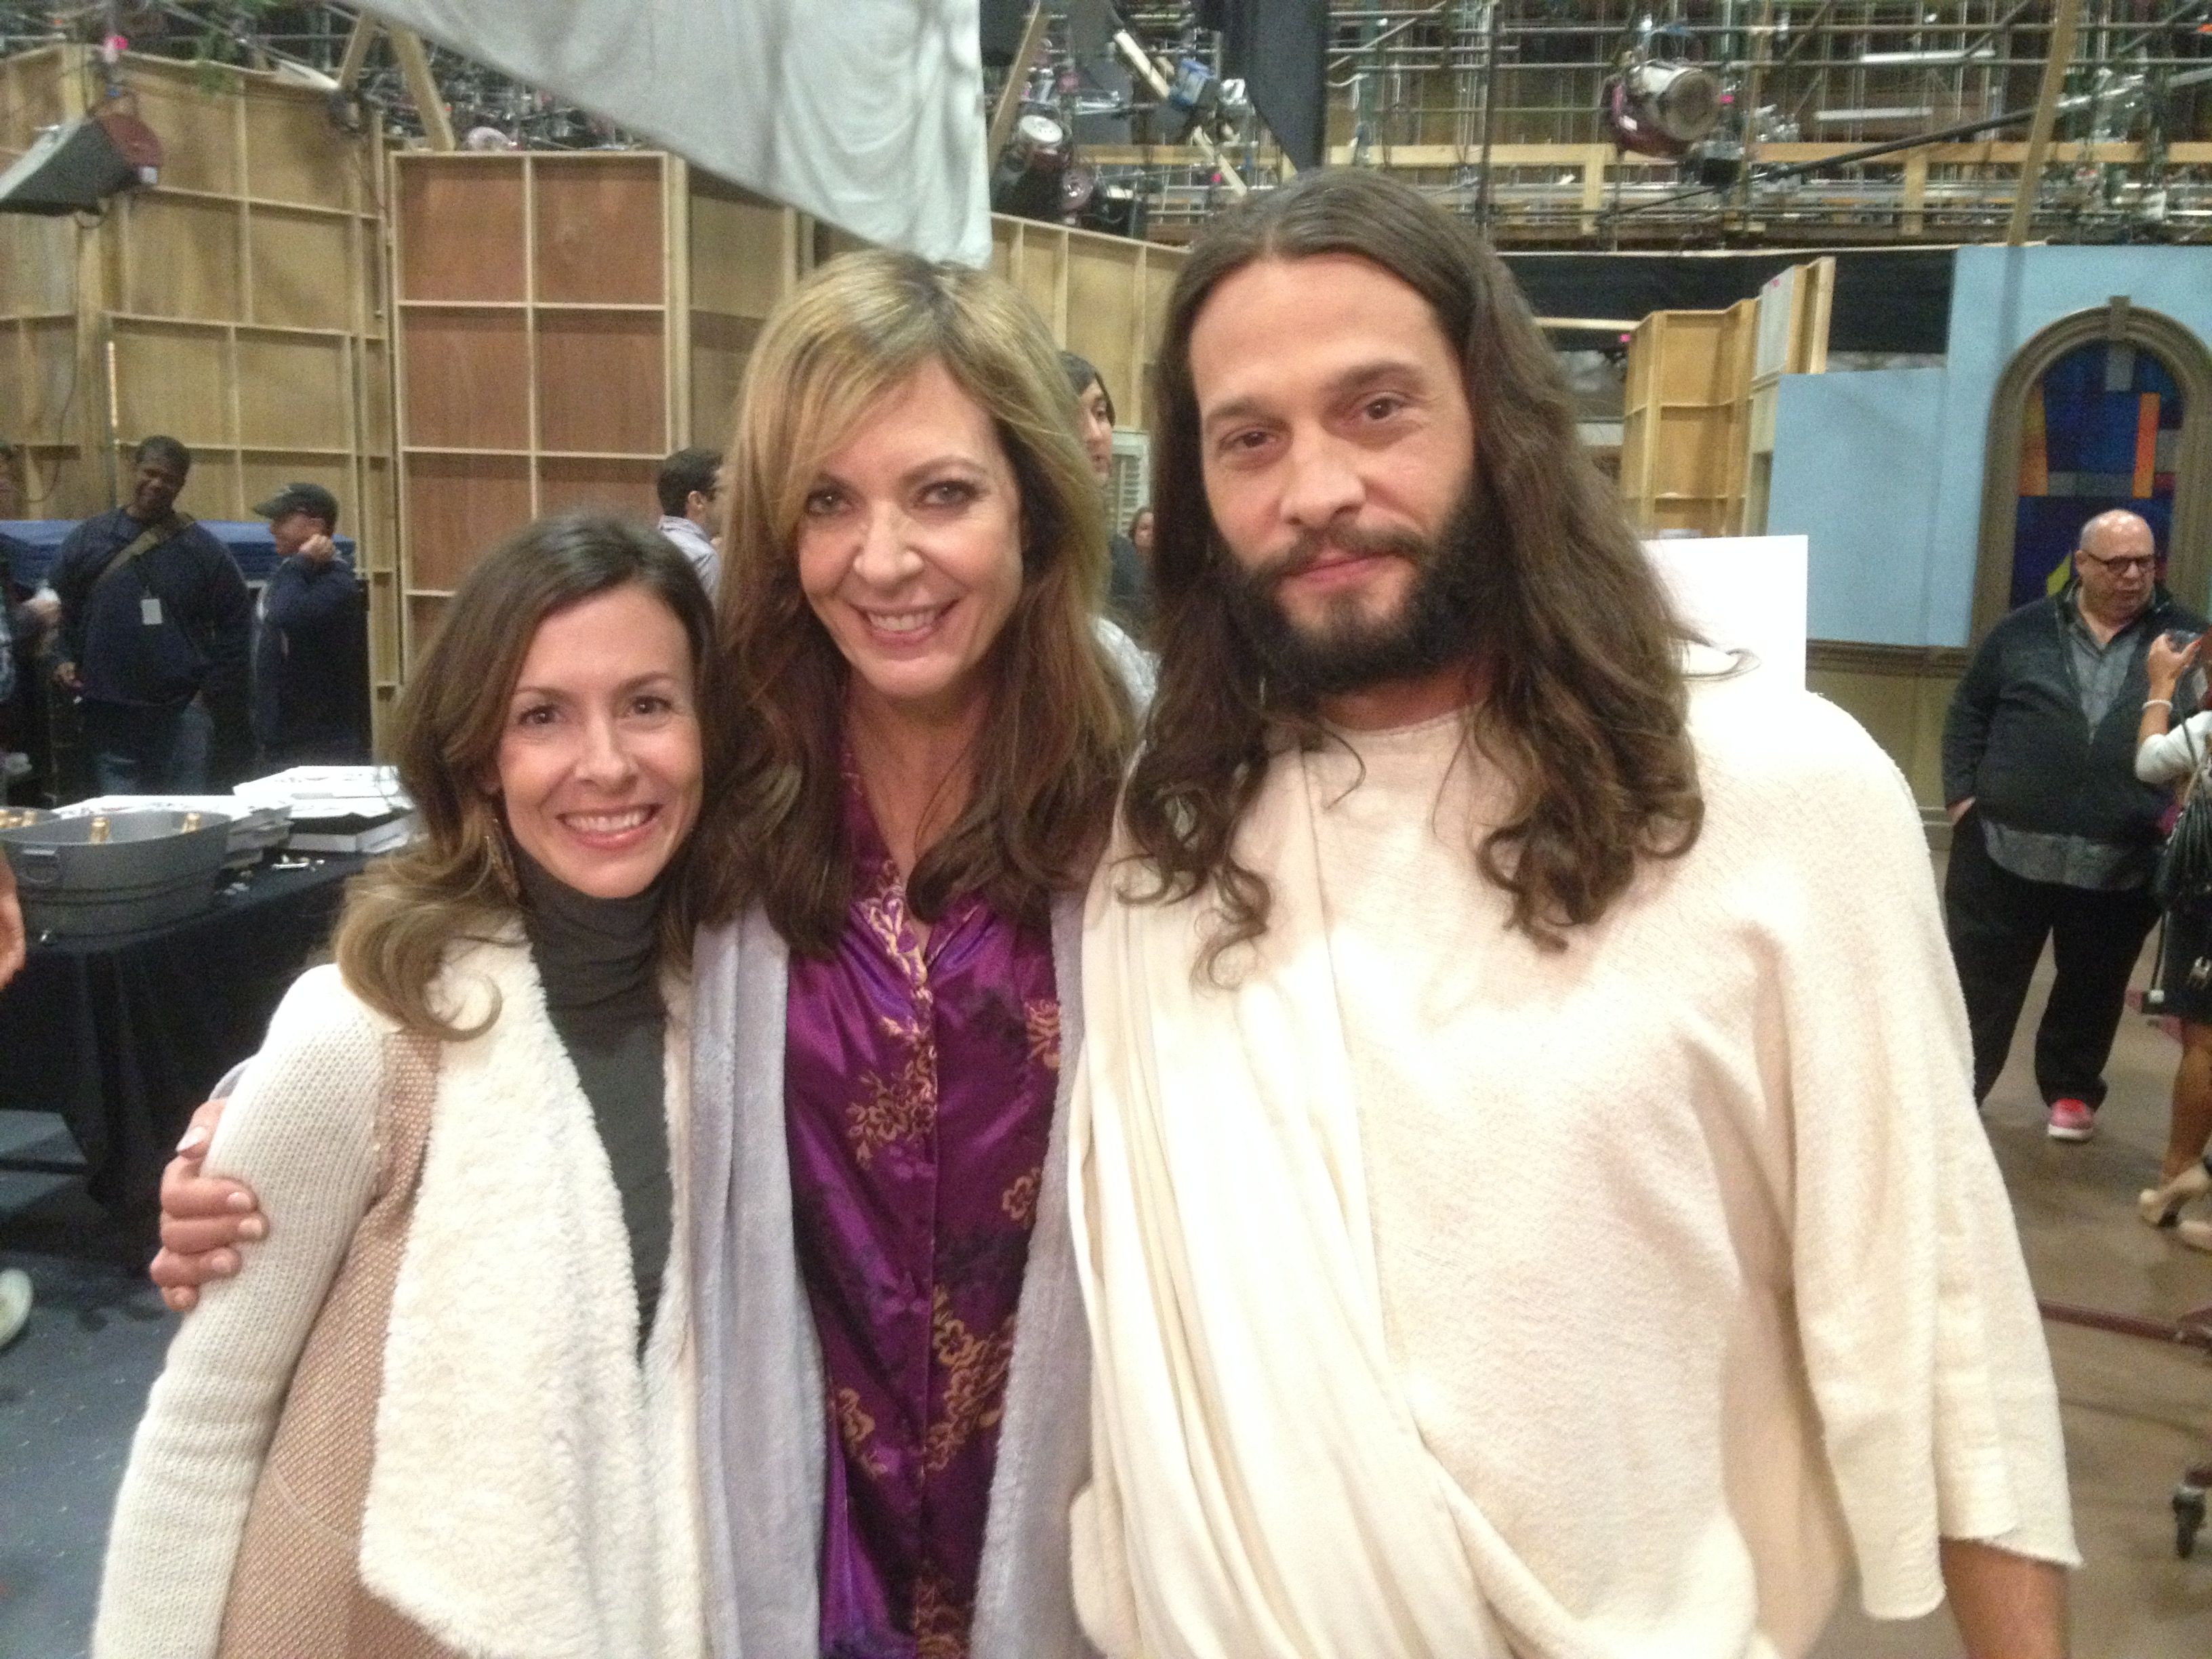 Etienne Eckert, Allison Janney, and John Charles Meyer on the set of the CBS show 